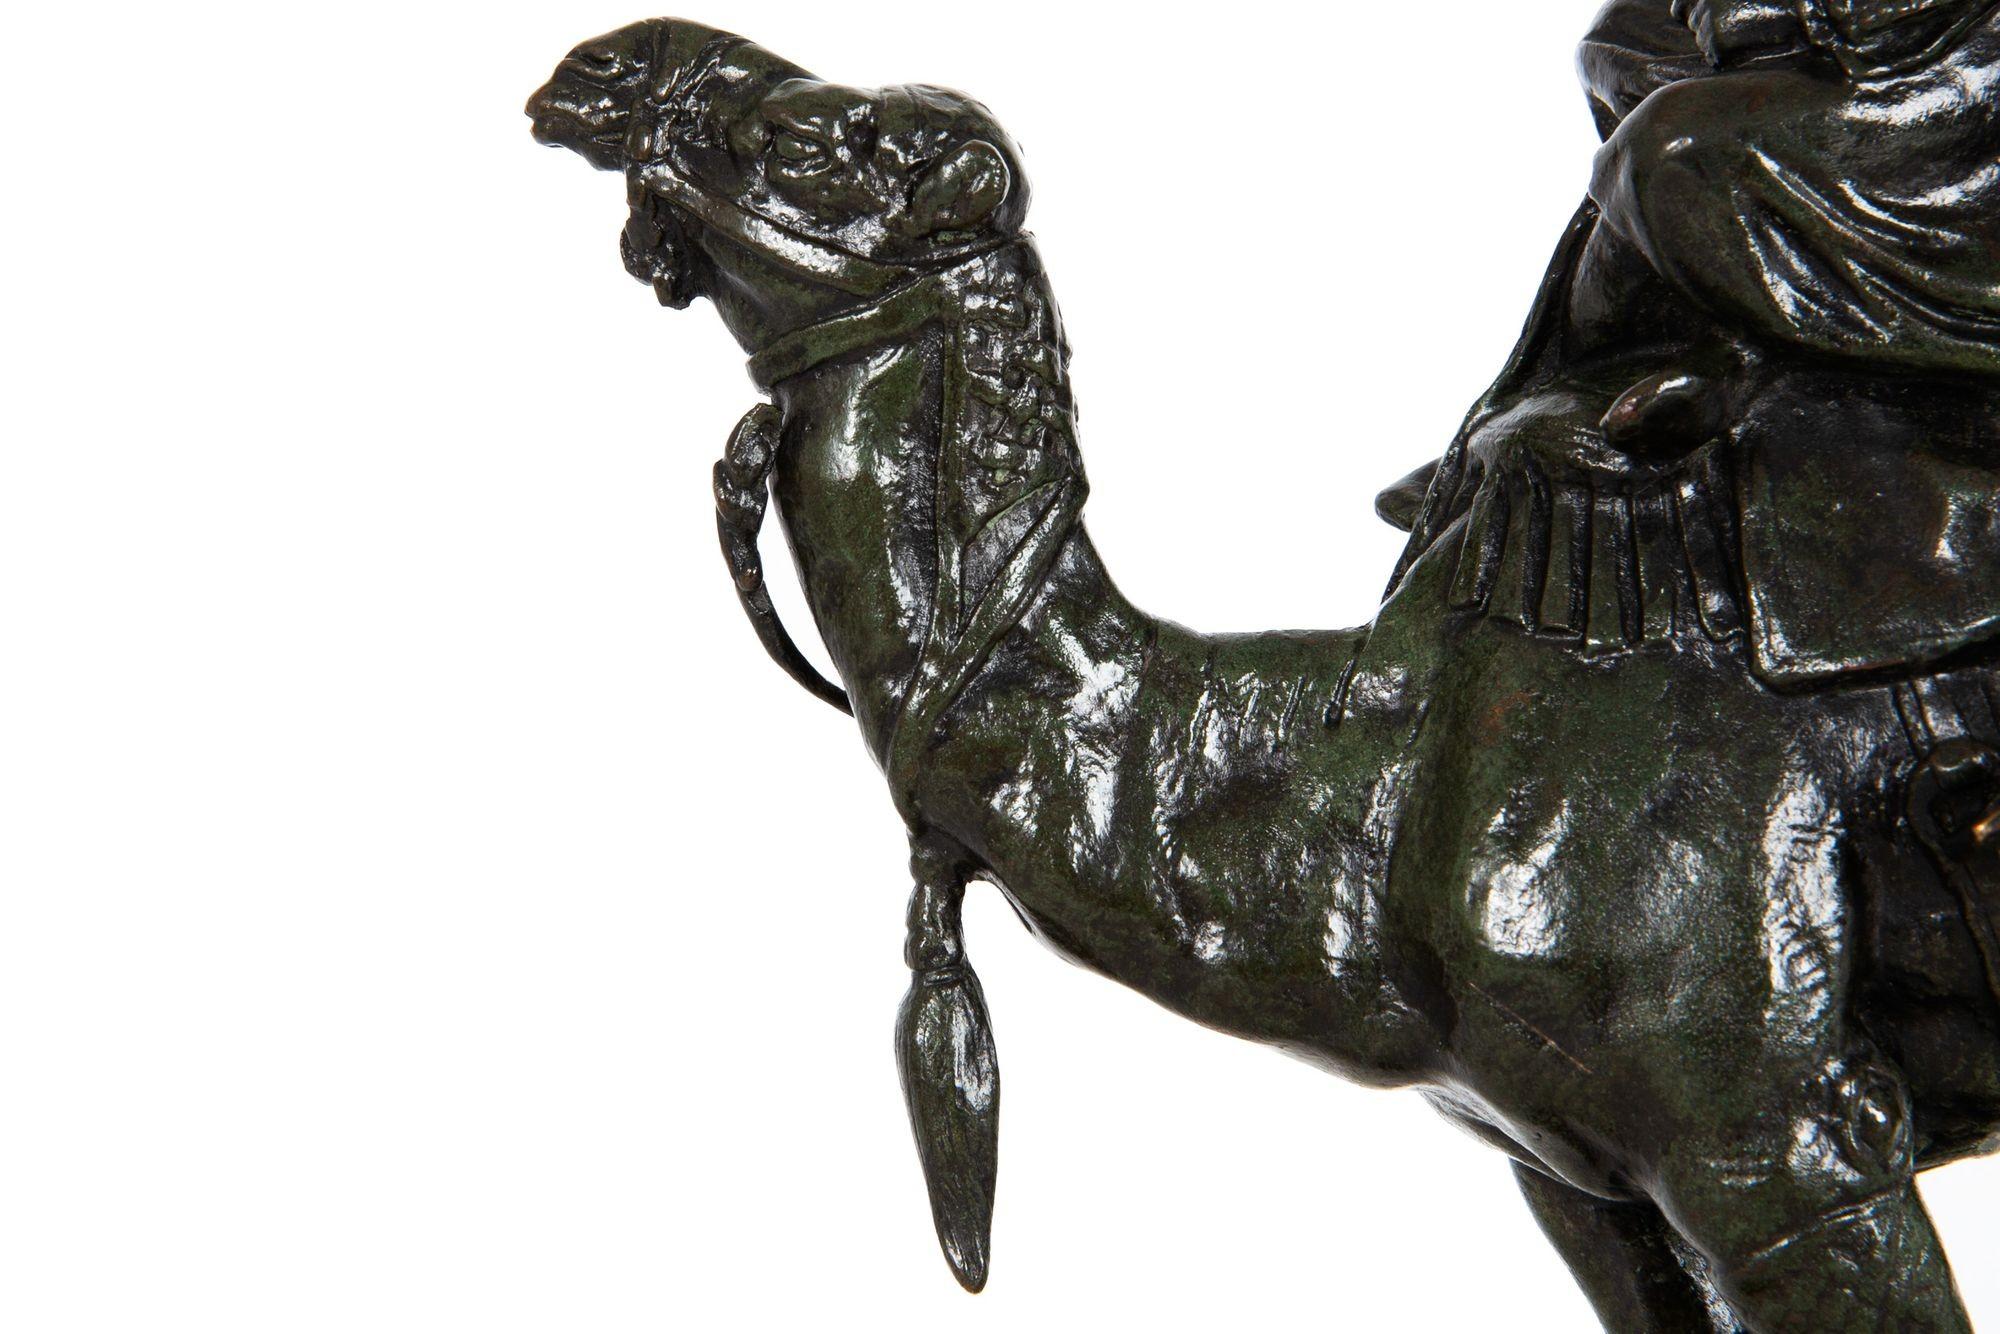 19th Century Rare Bronze Sculpture of “Arab on Camel” by Antoine-Louis Barye circa 1880 For Sale